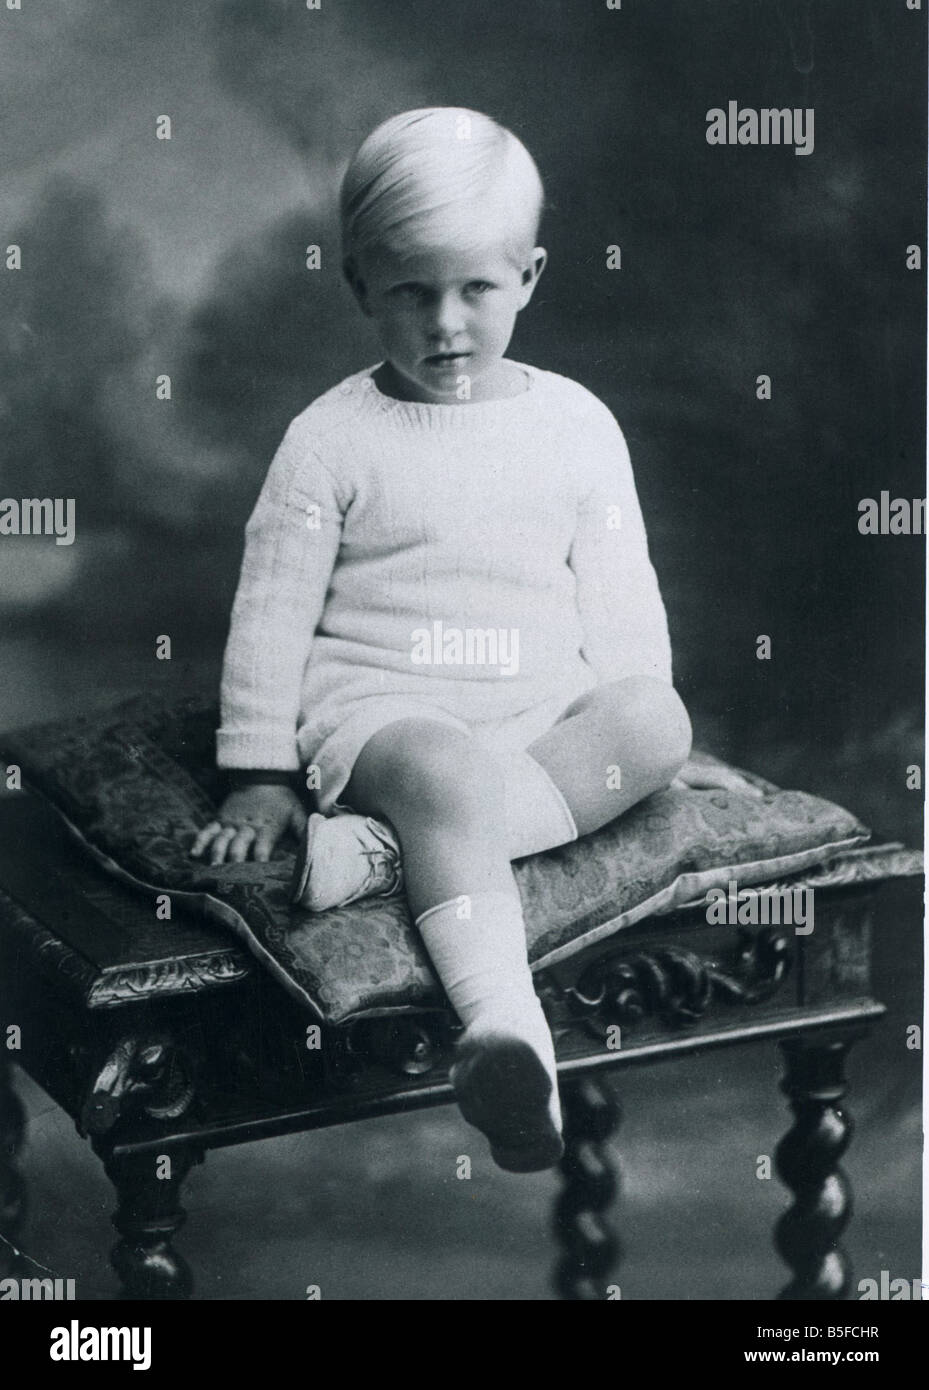 Prince Philip Duke of Edinburgh seen here as a young boy at the ...